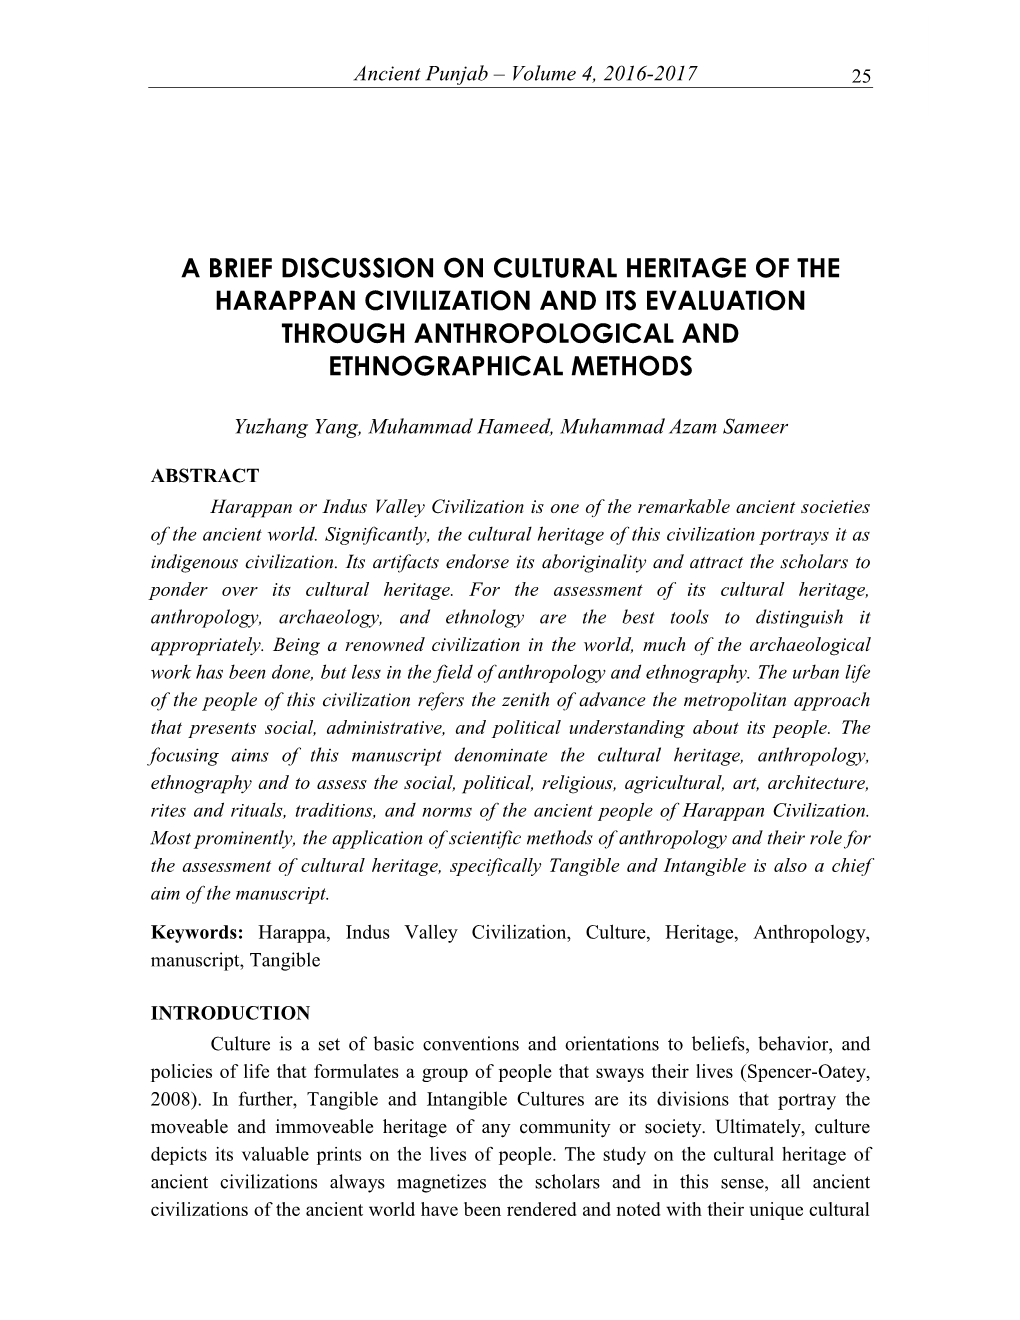 A Brief Discussion on Cultural Heritage of the Harappan Civilization and Its Evaluation Through Anthropological and Ethnographical Methods